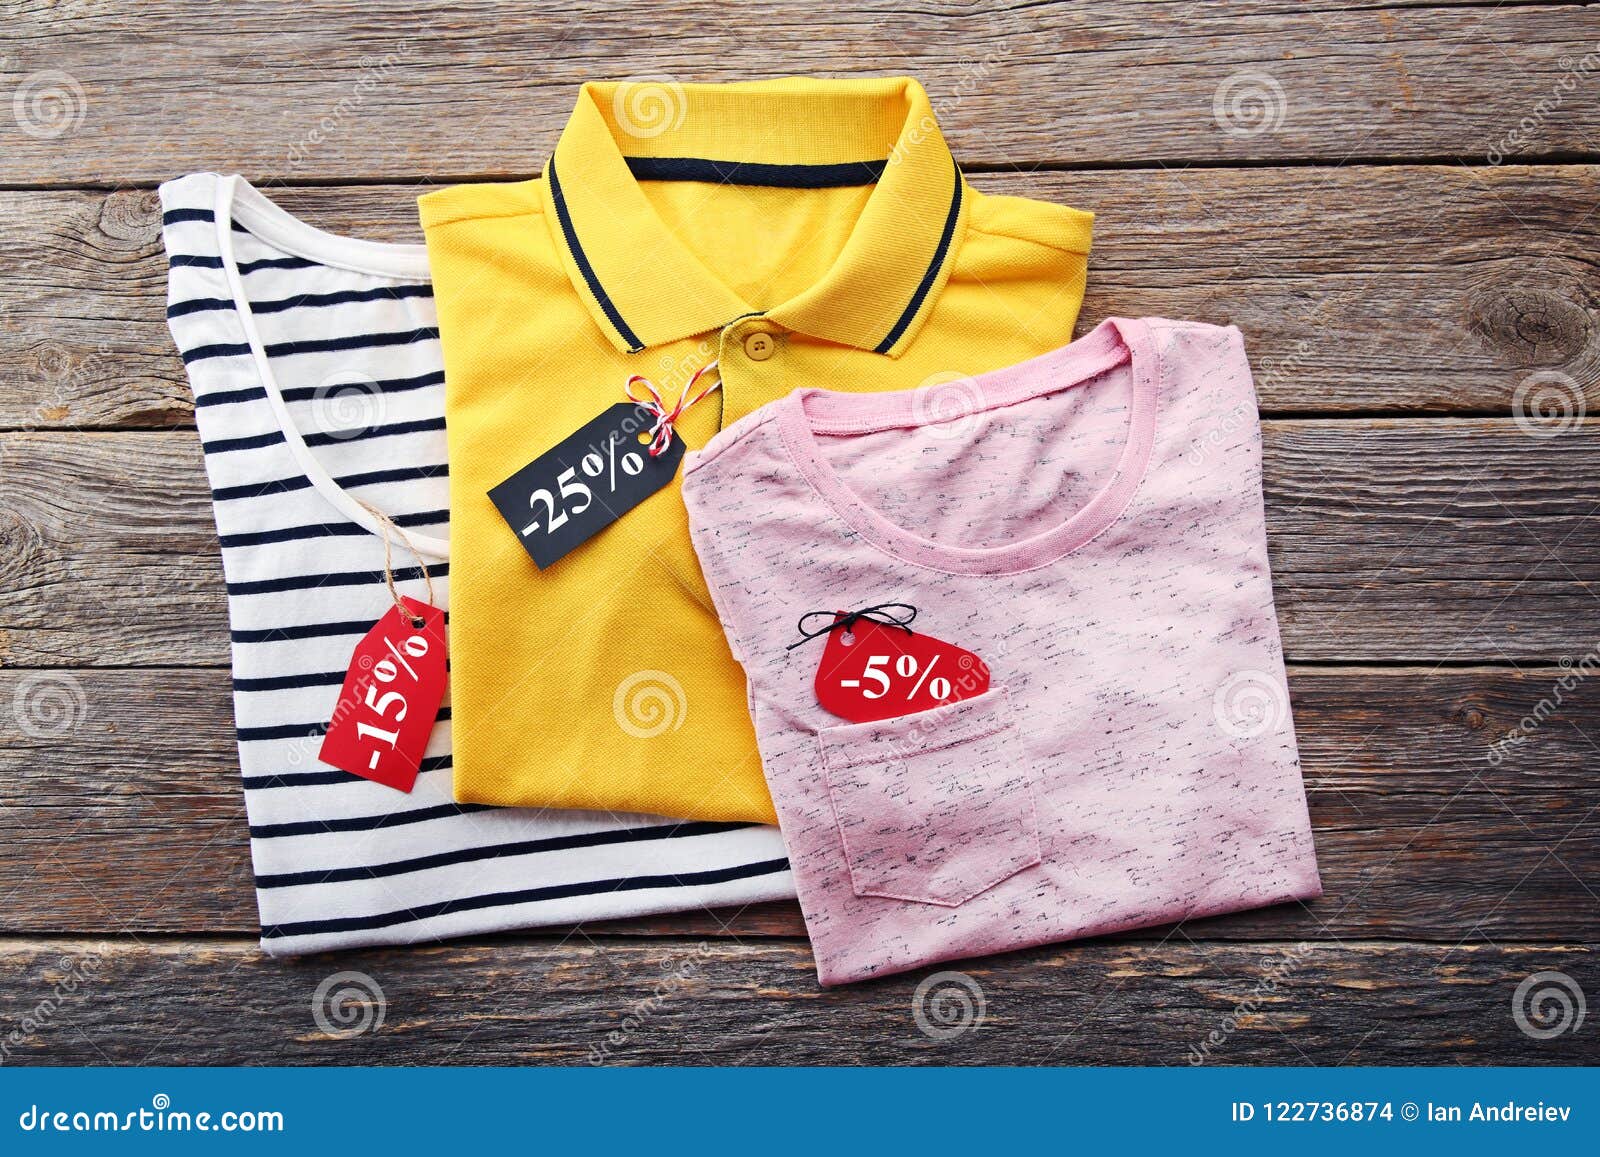 Sale tags with clothes stock photo. Image of card, price - 122736874